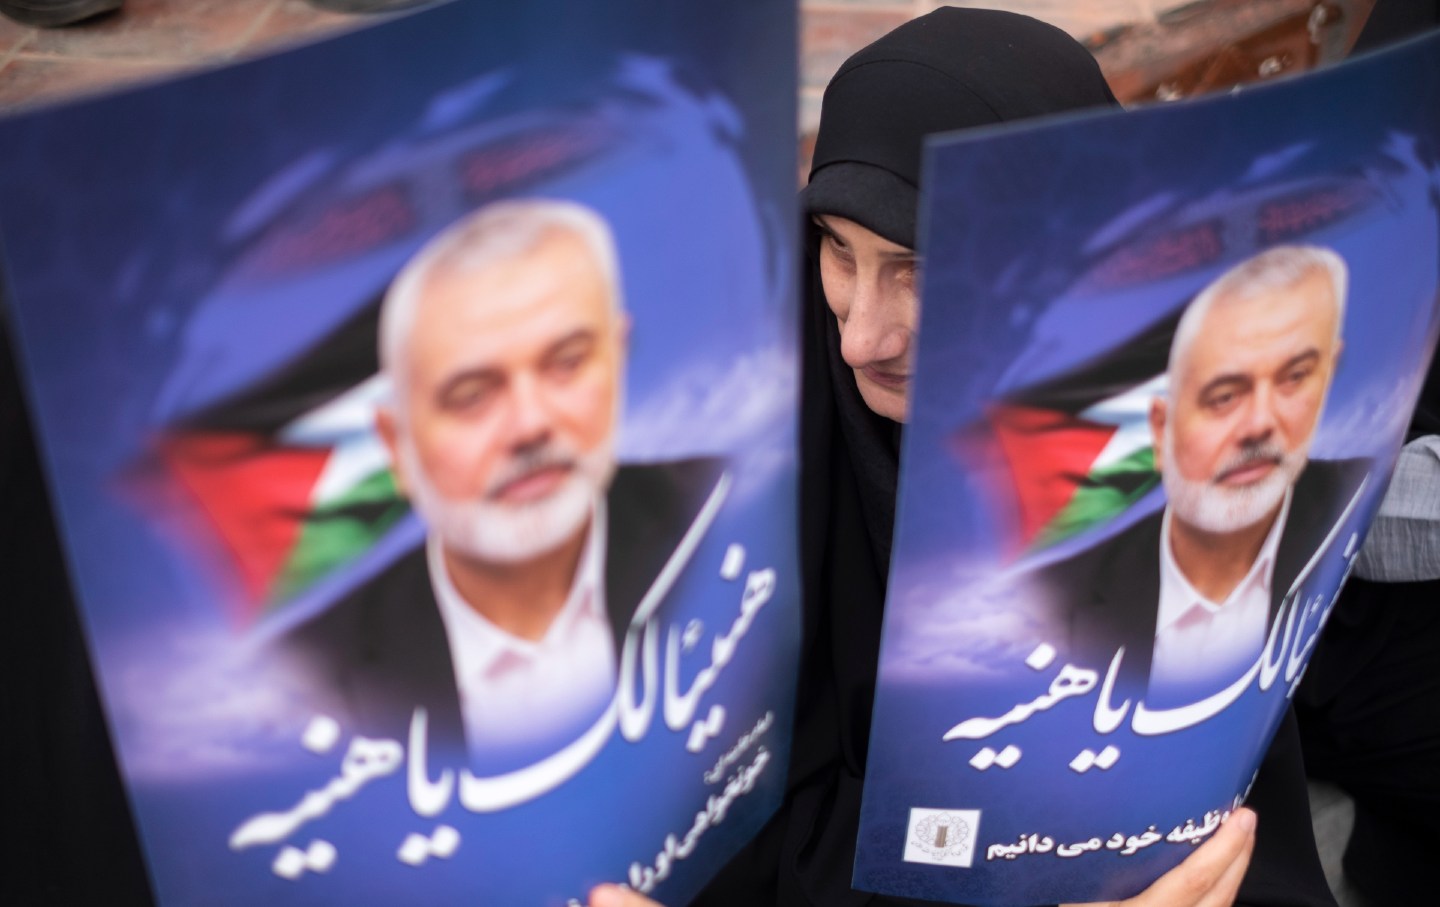 Iranian mourners hold portraits of Hamas leader Ismail Haniyeh during a funeral ceremony for him and his bodyguard Abu Shaaban in Tehran, Iran, on August 1, 2024.